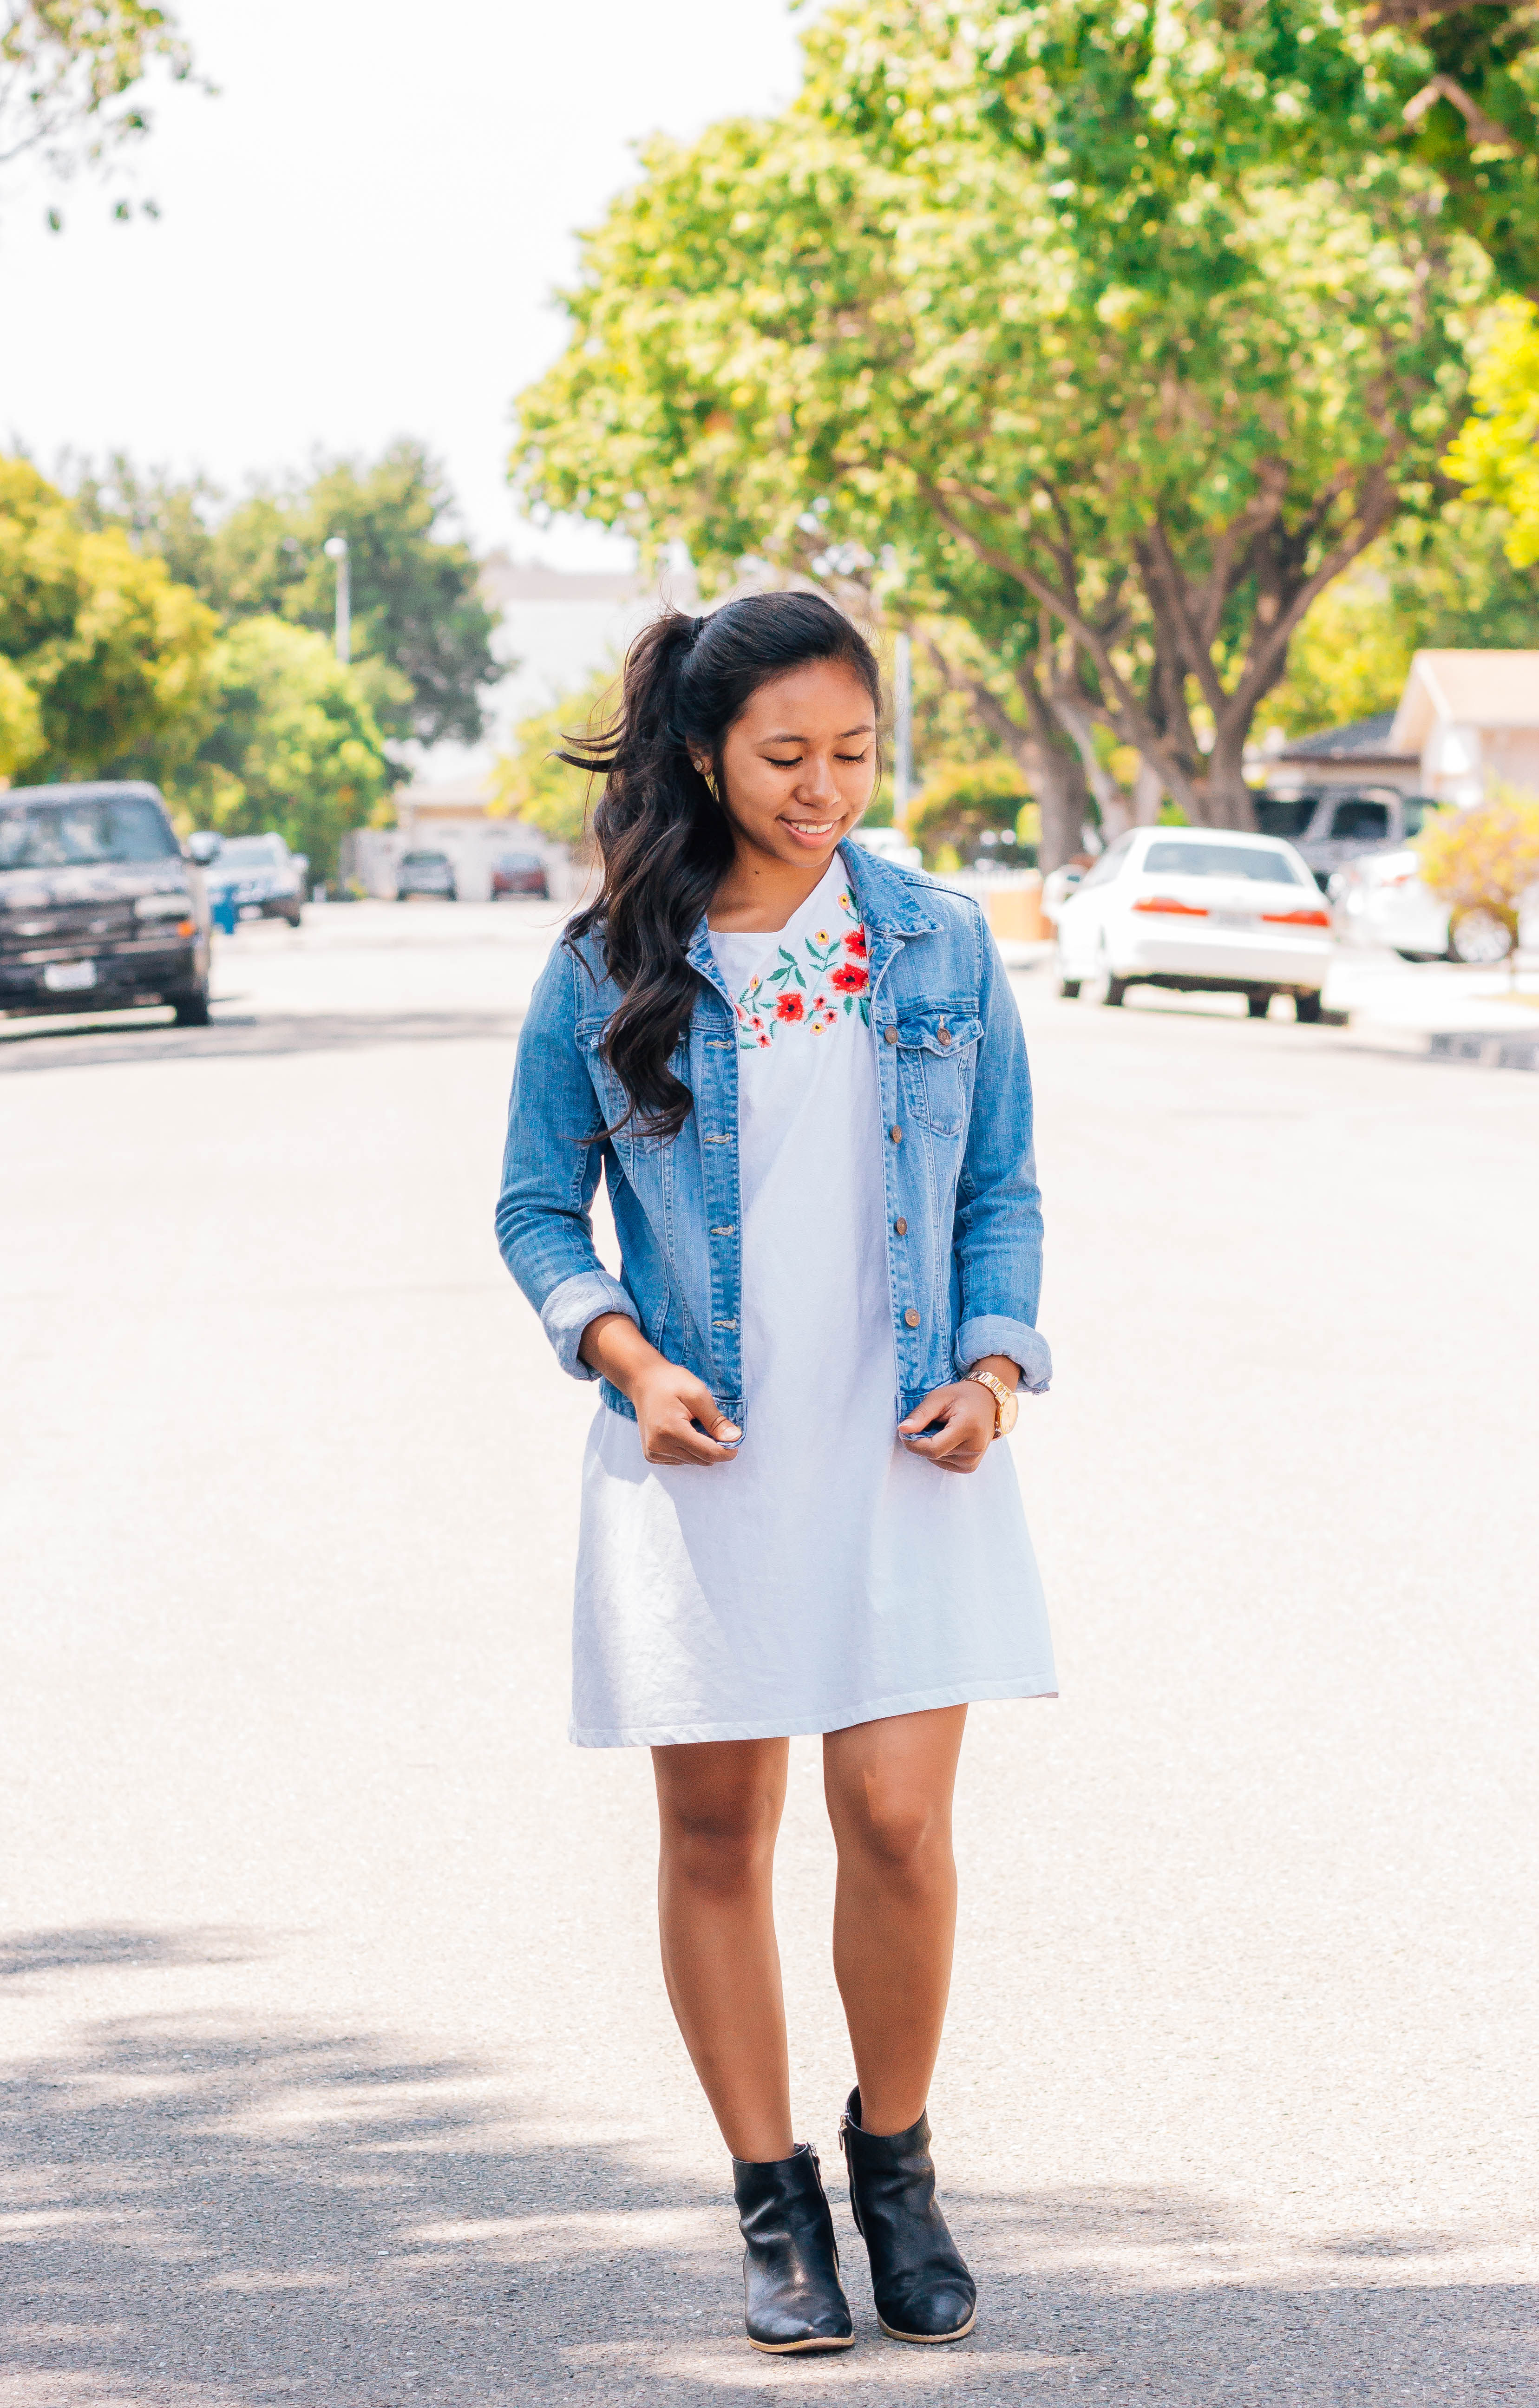 Denim jacket, white dress, and black ankle boots | 7 cute and modest back to school outfits that you can wear | high school and college outfits | P31beauty